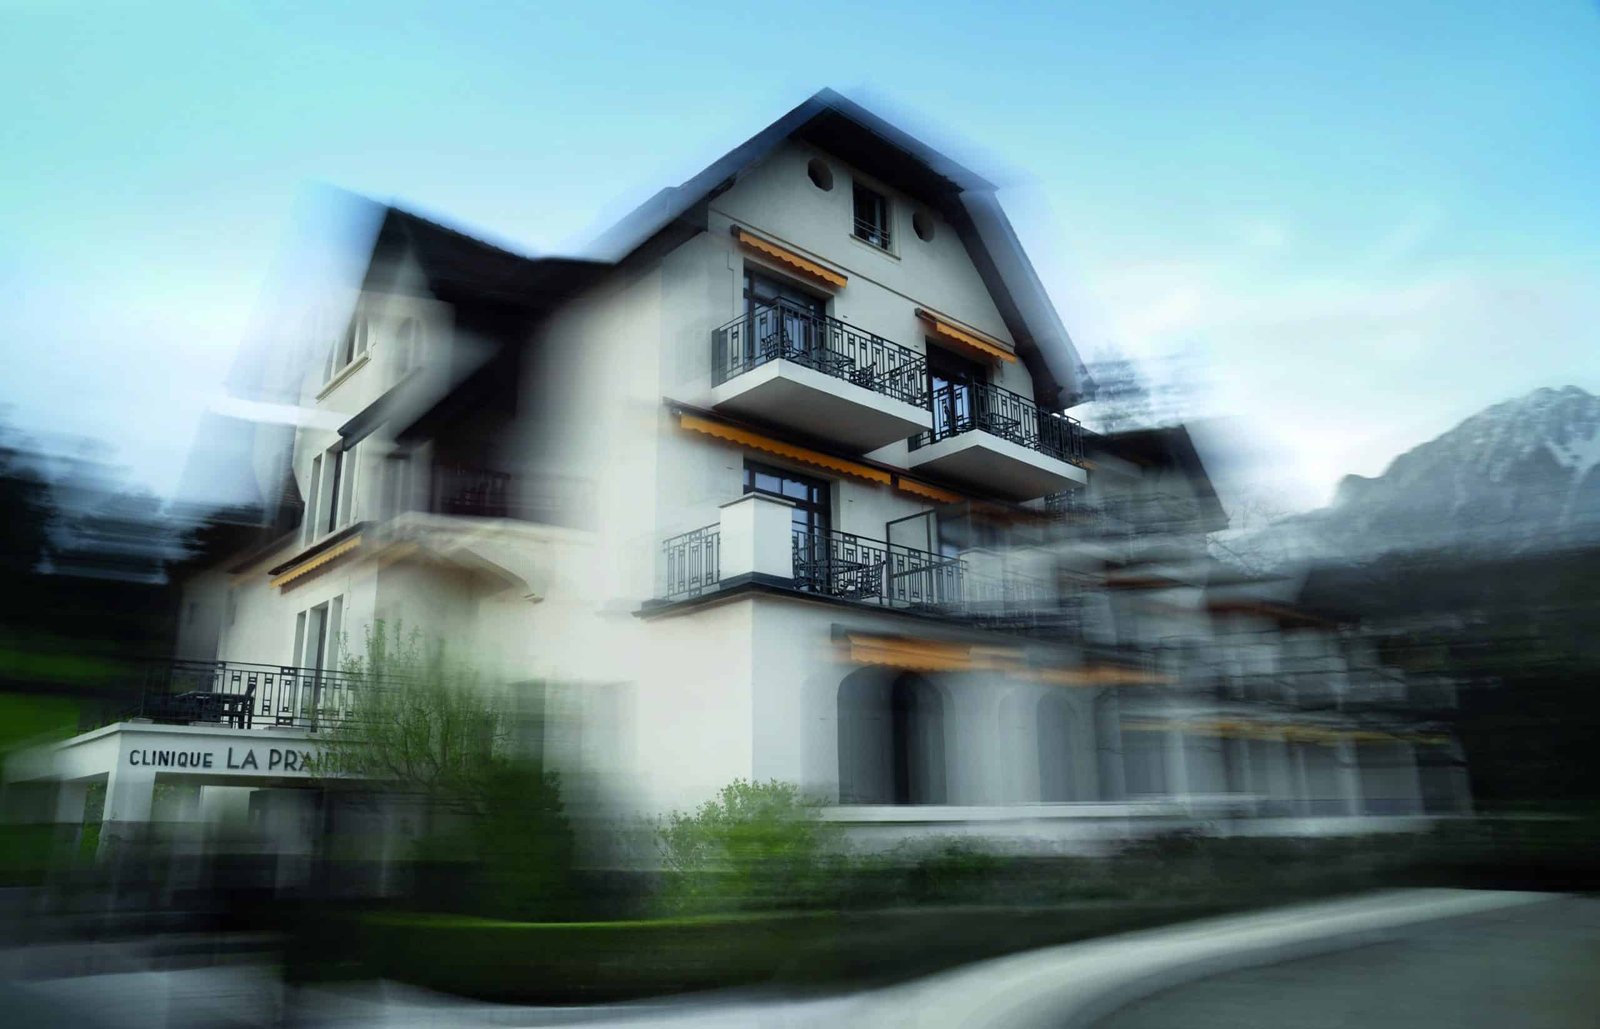 A blurry image of a house that captures the essence of life.